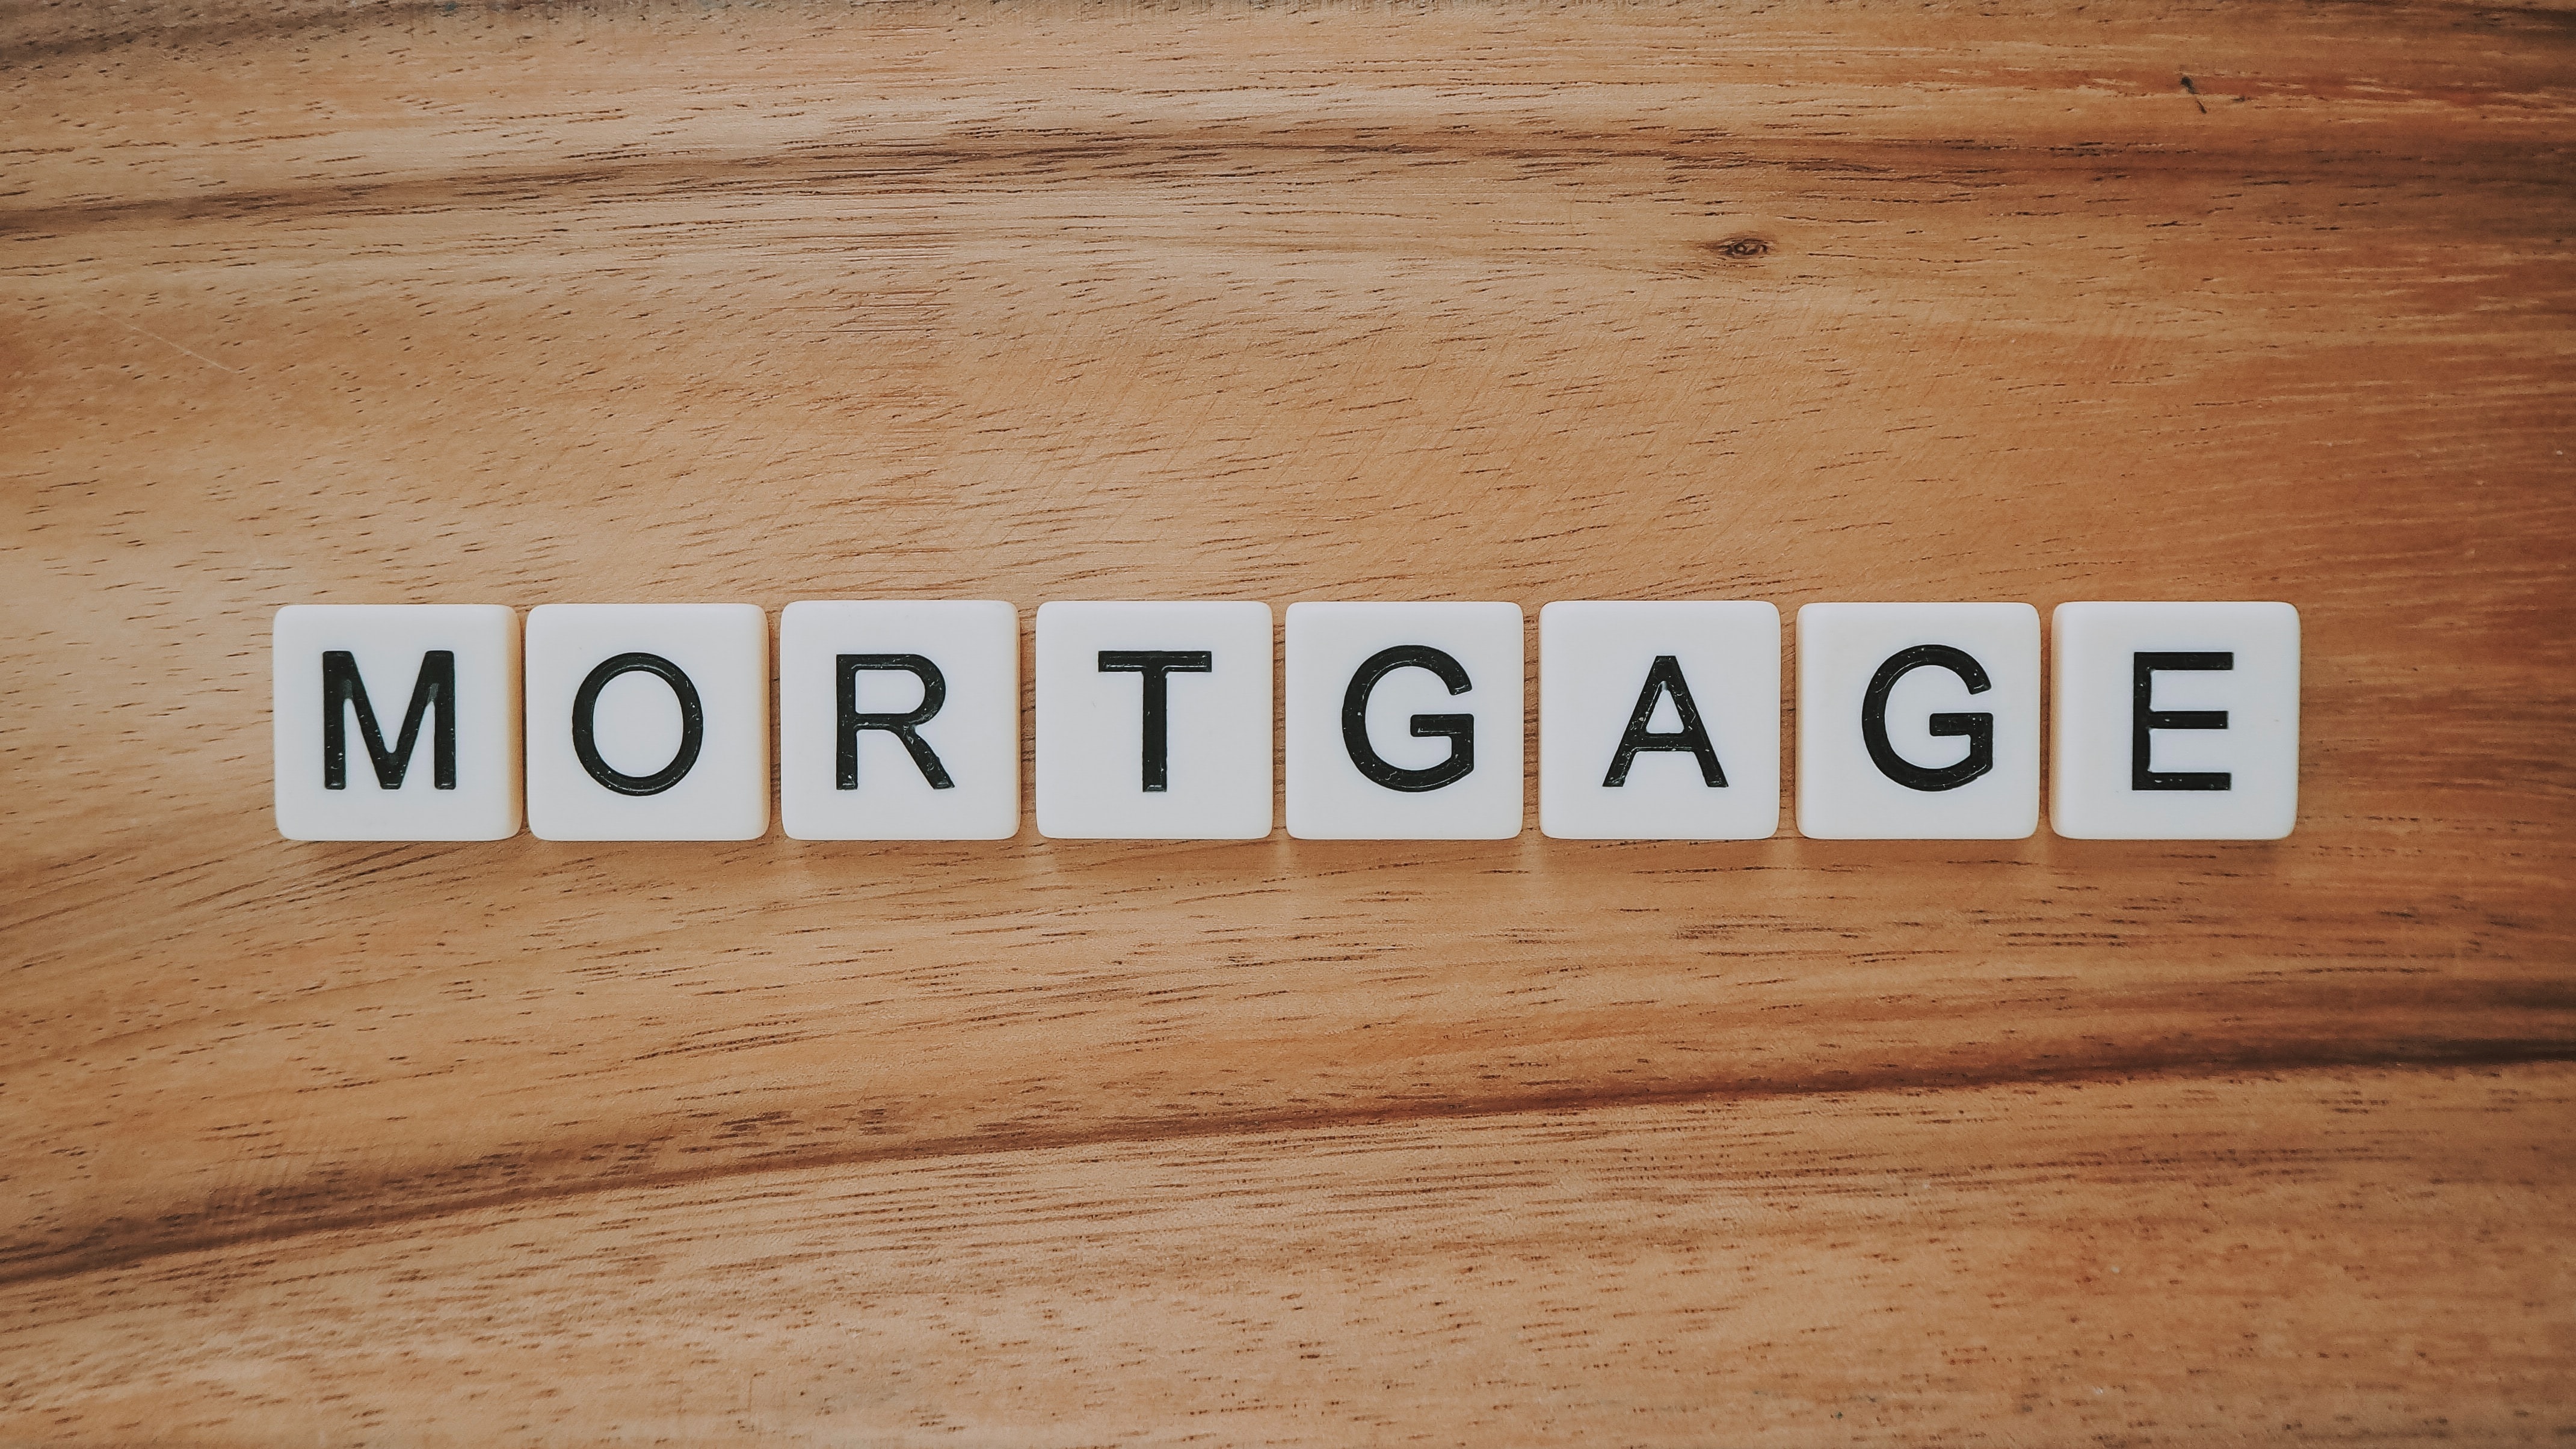 Scrabble tiles spelling out “Mortgage” on a light wooden background; image by Preconodo CA, via Unsplash.com.